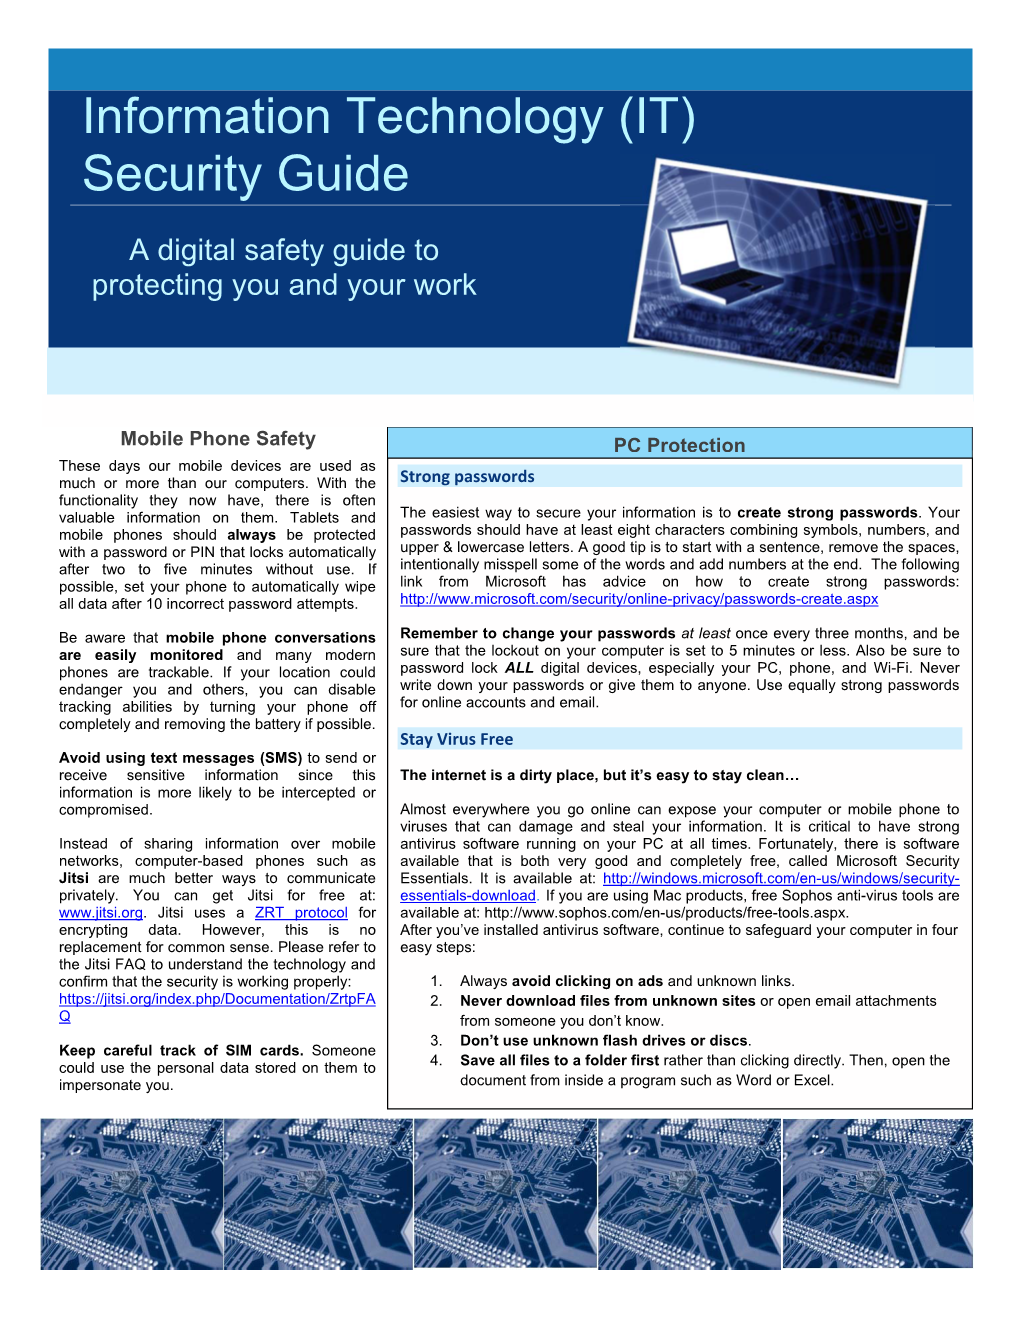 (IT) Security Guide